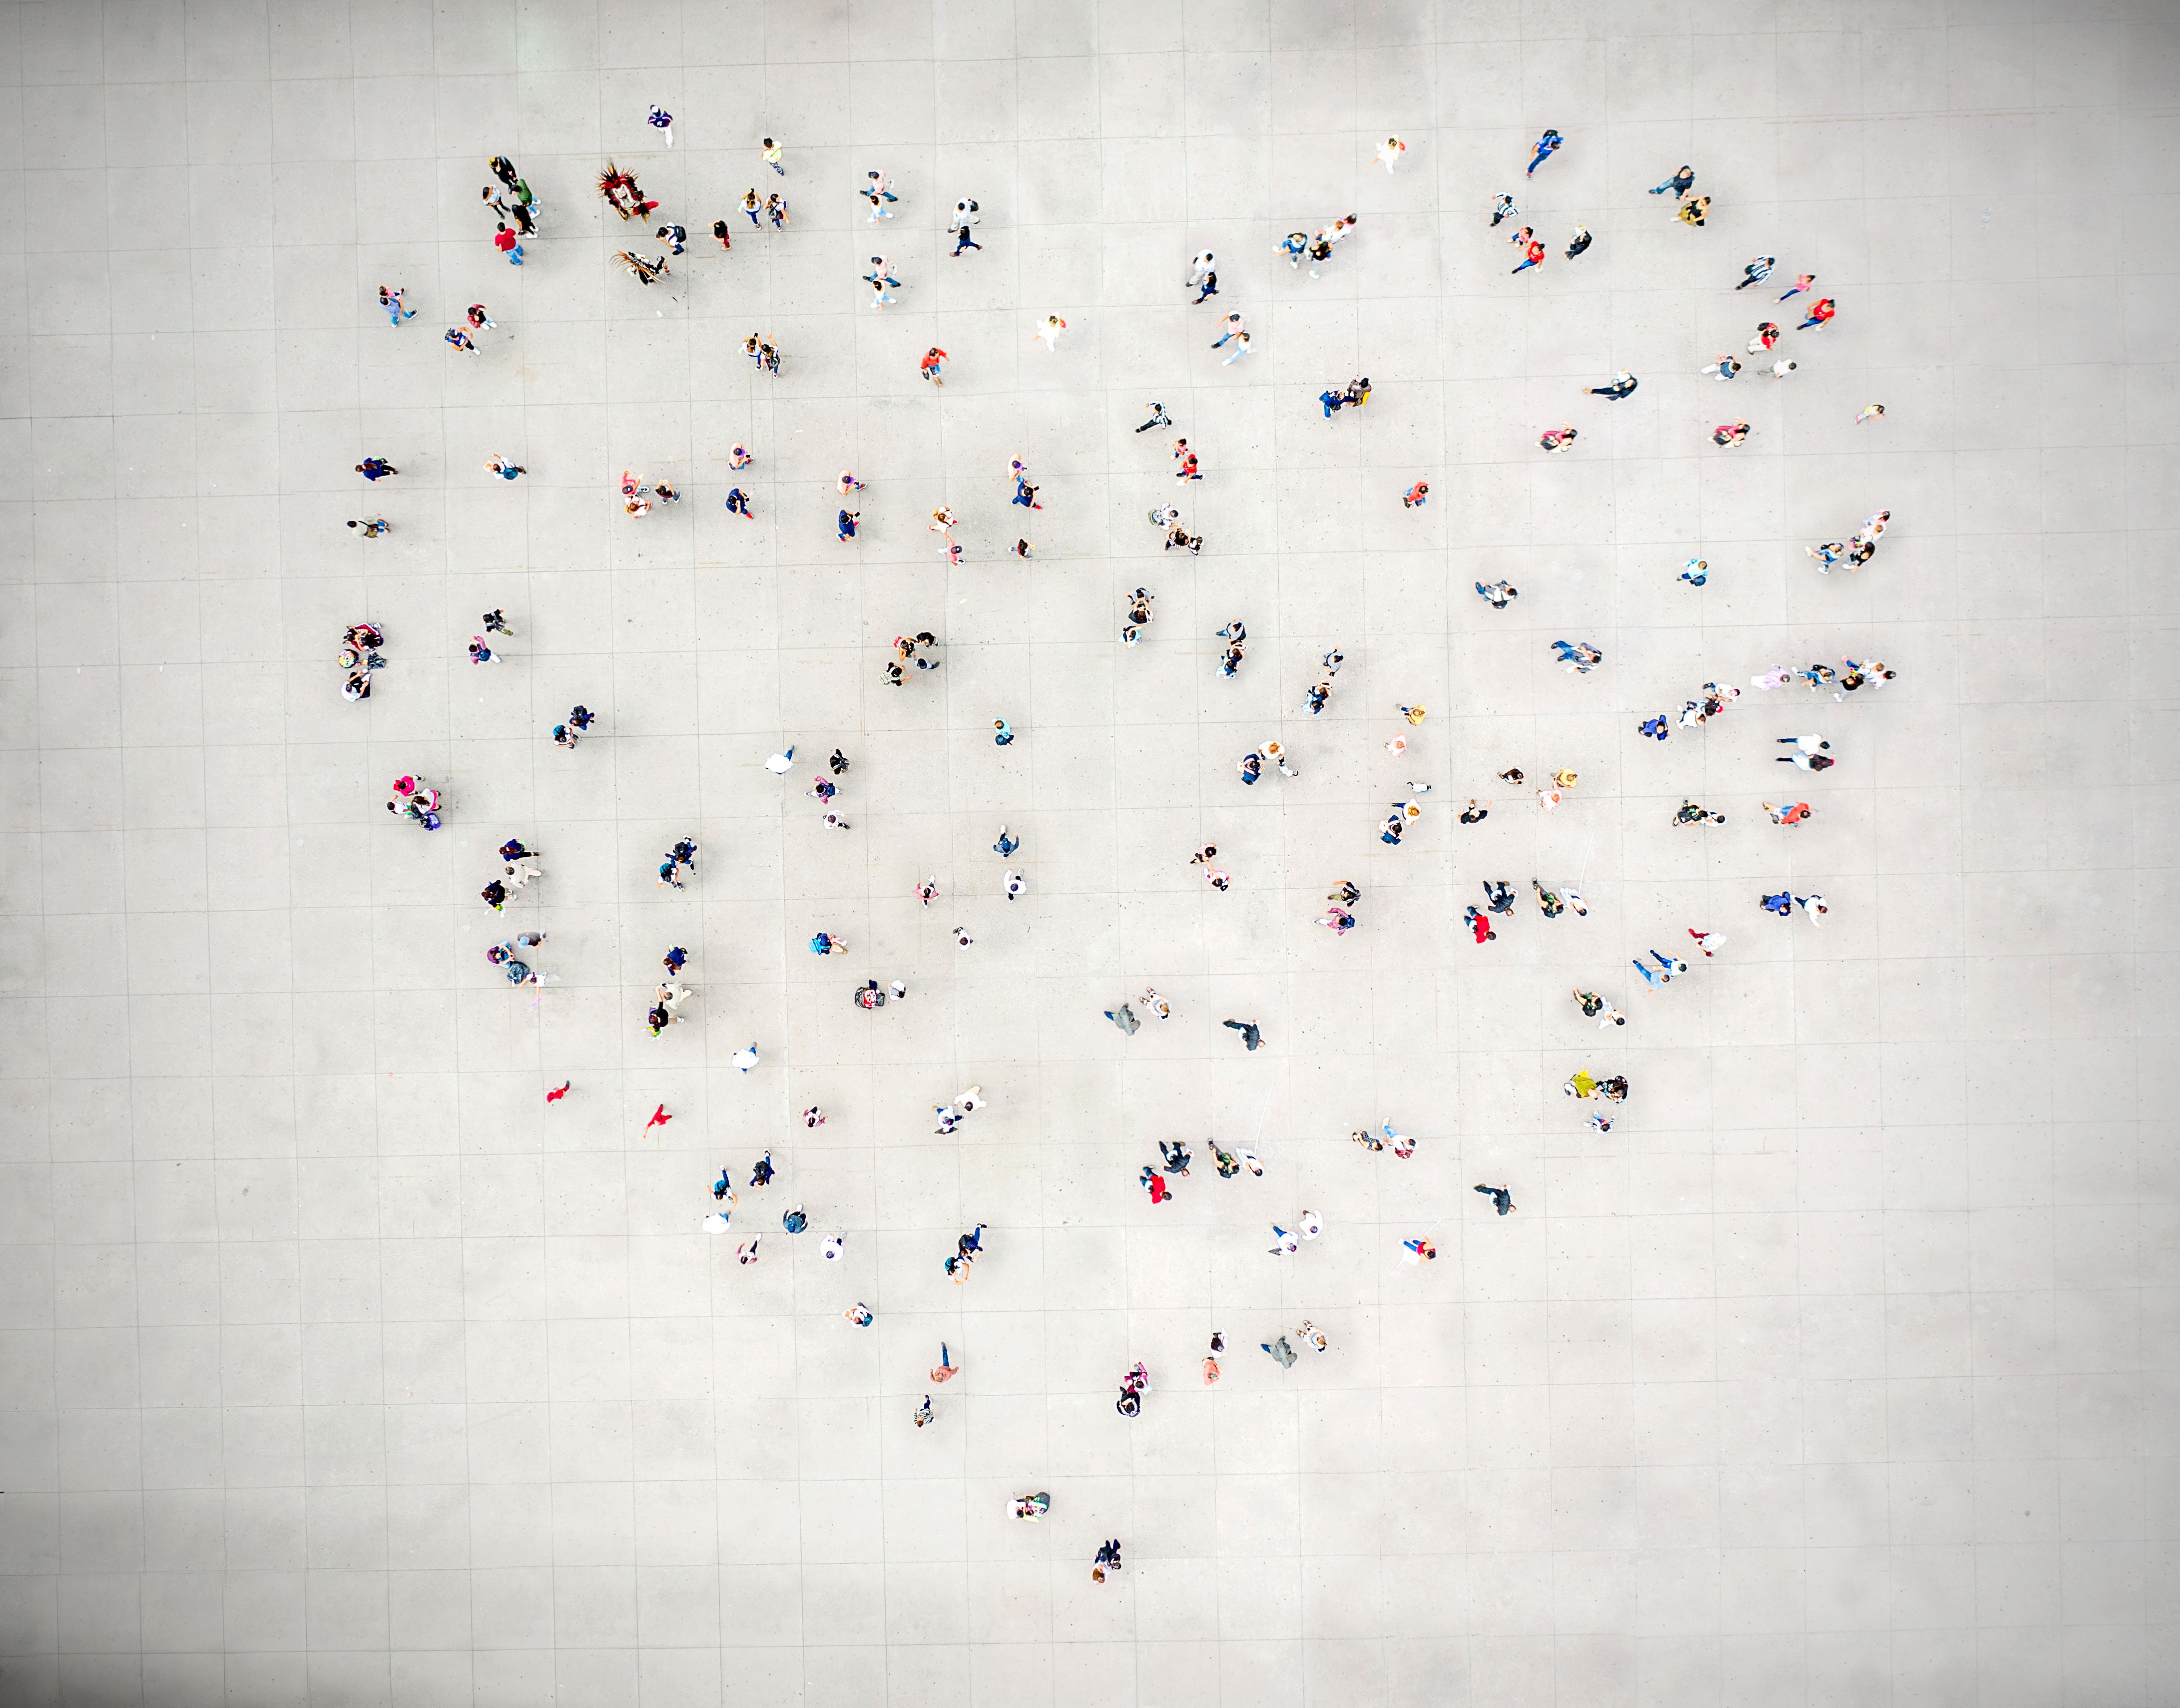 A group of people standing together in the collective shape of a heart.